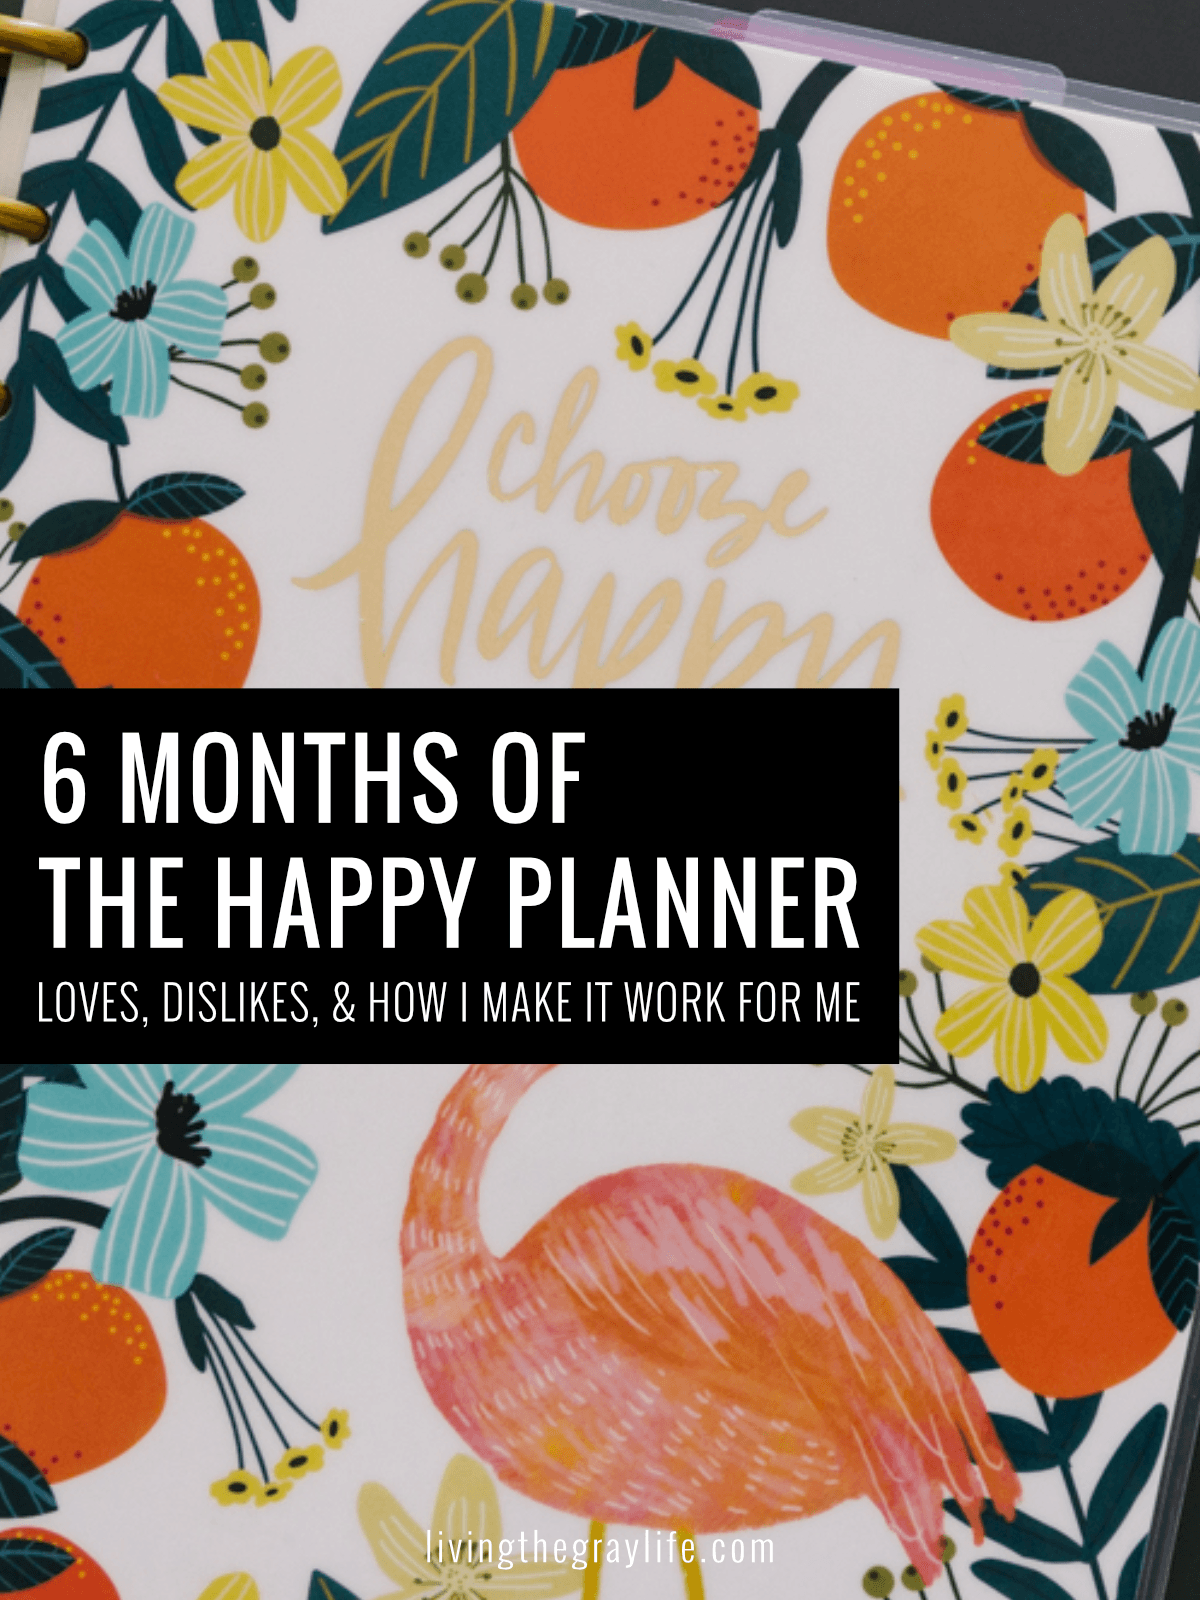 Happy Planner Blog Cover